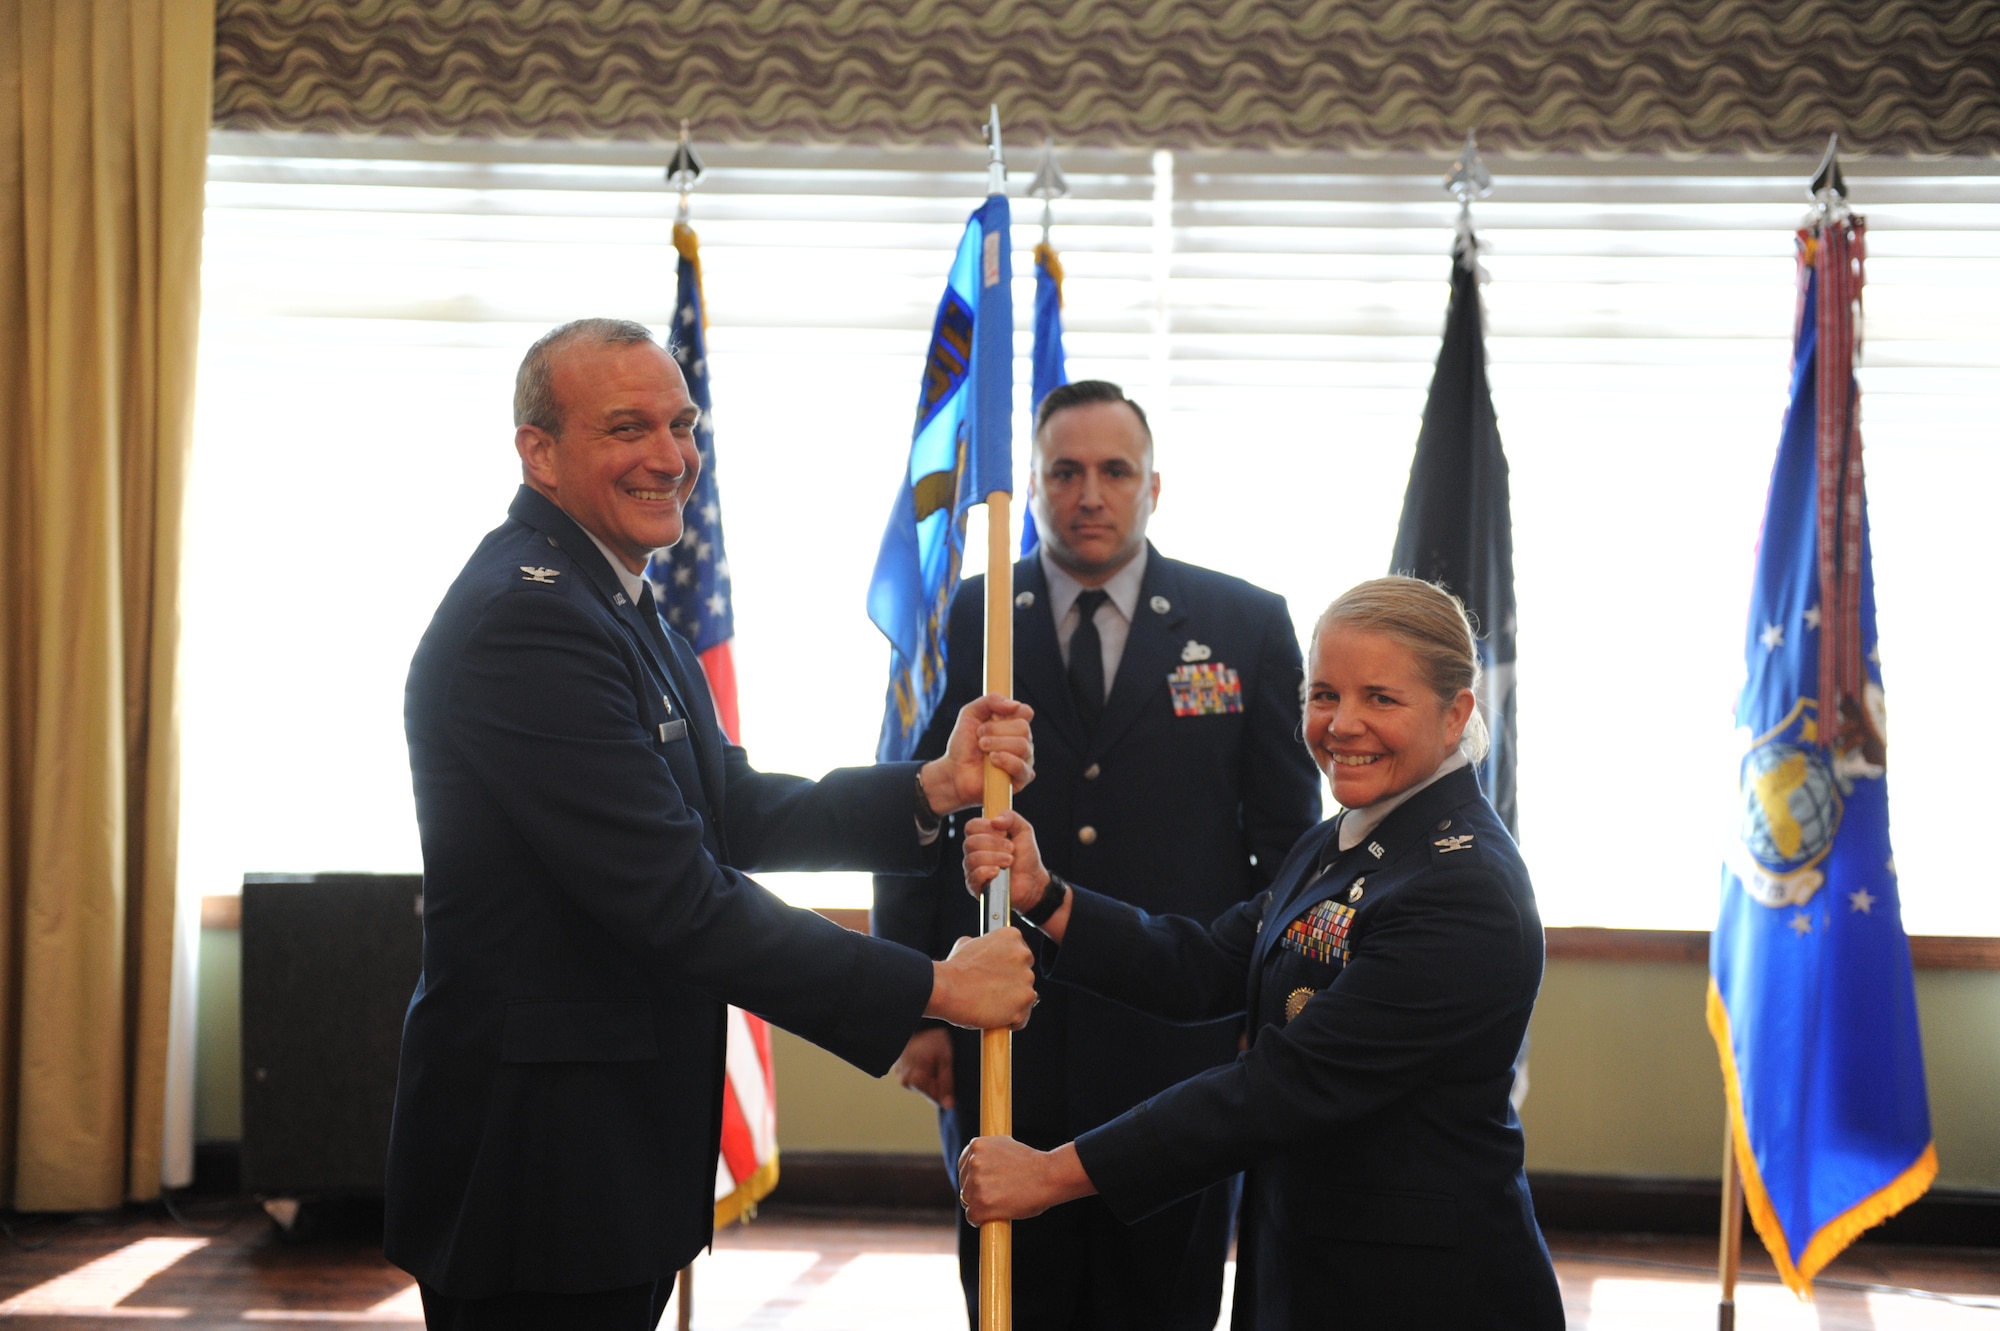 Col. Maurizio Calabrese (left), National Air and Space Intelligence Center commander, presents the ceremonial guidon to Col. Catherine Gambold, inbound Air and Cyberspace Intelligence Group commander, during the group’s change of command ceremony at the Wright-Patterson Club, June 1, 2022. Gambold previously served as the executive officer to the director of the Defense Intelligence Agency. (U.S. Air Force photo by Senior Airman Kristof J. Rixmann)